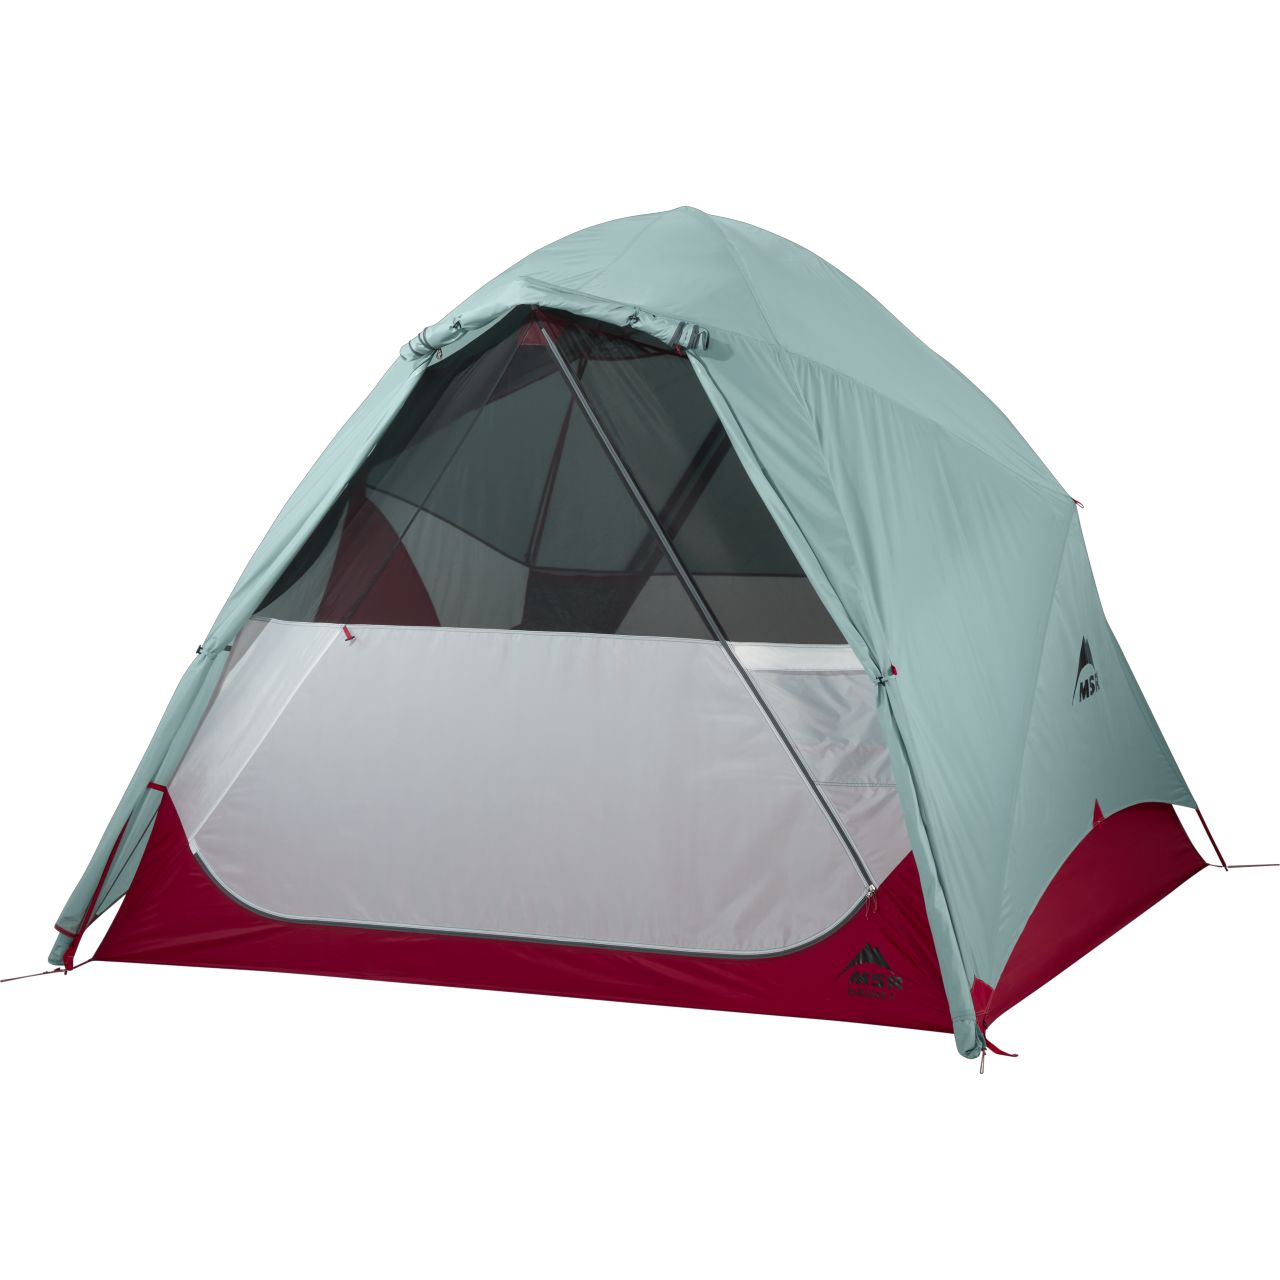 MSR Habiscape 4 | 3-Season Tents | 4-Person Tents | Family Camping Tents